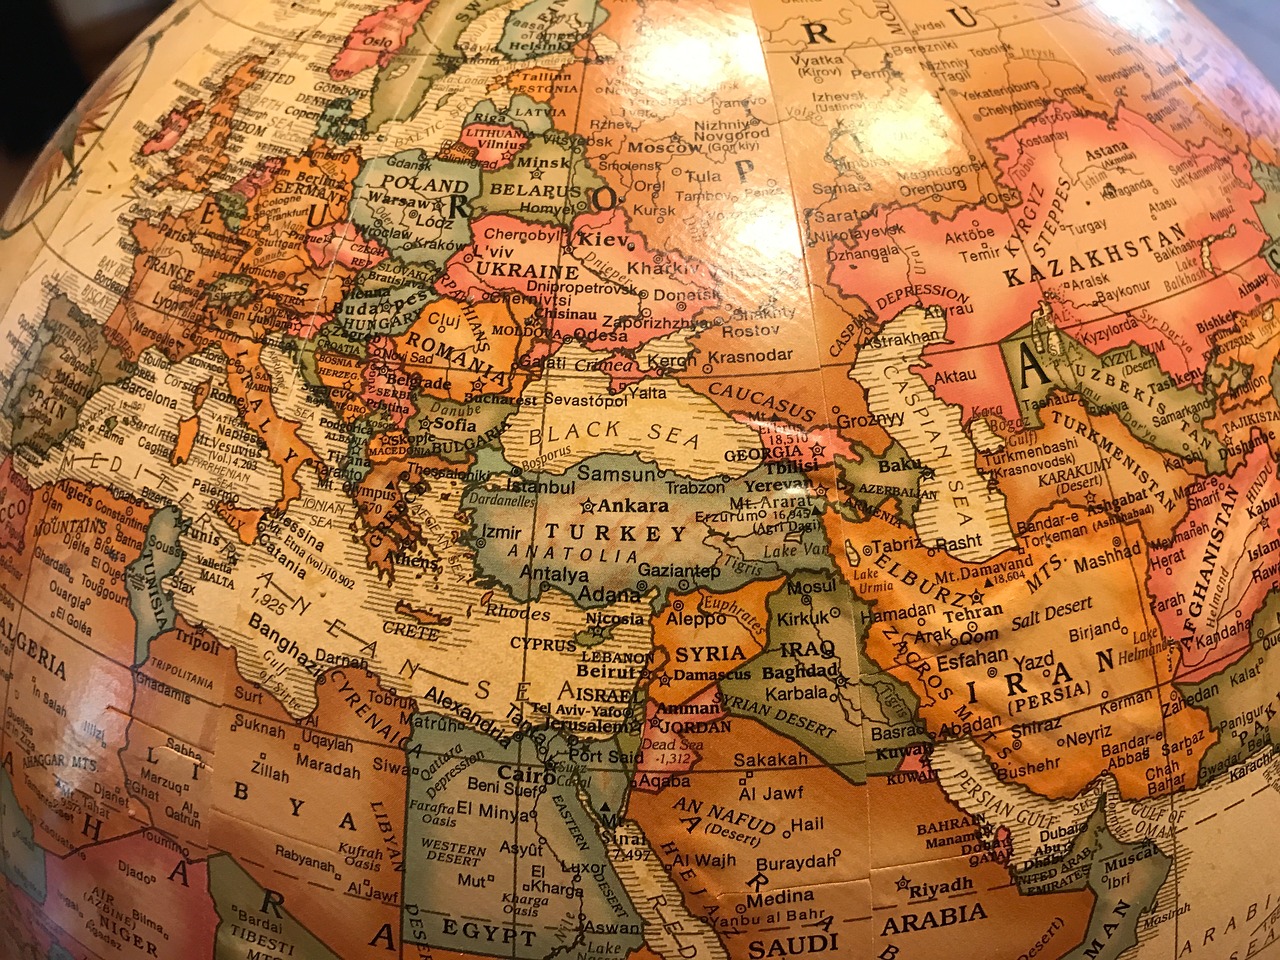 An antique-looking globe.